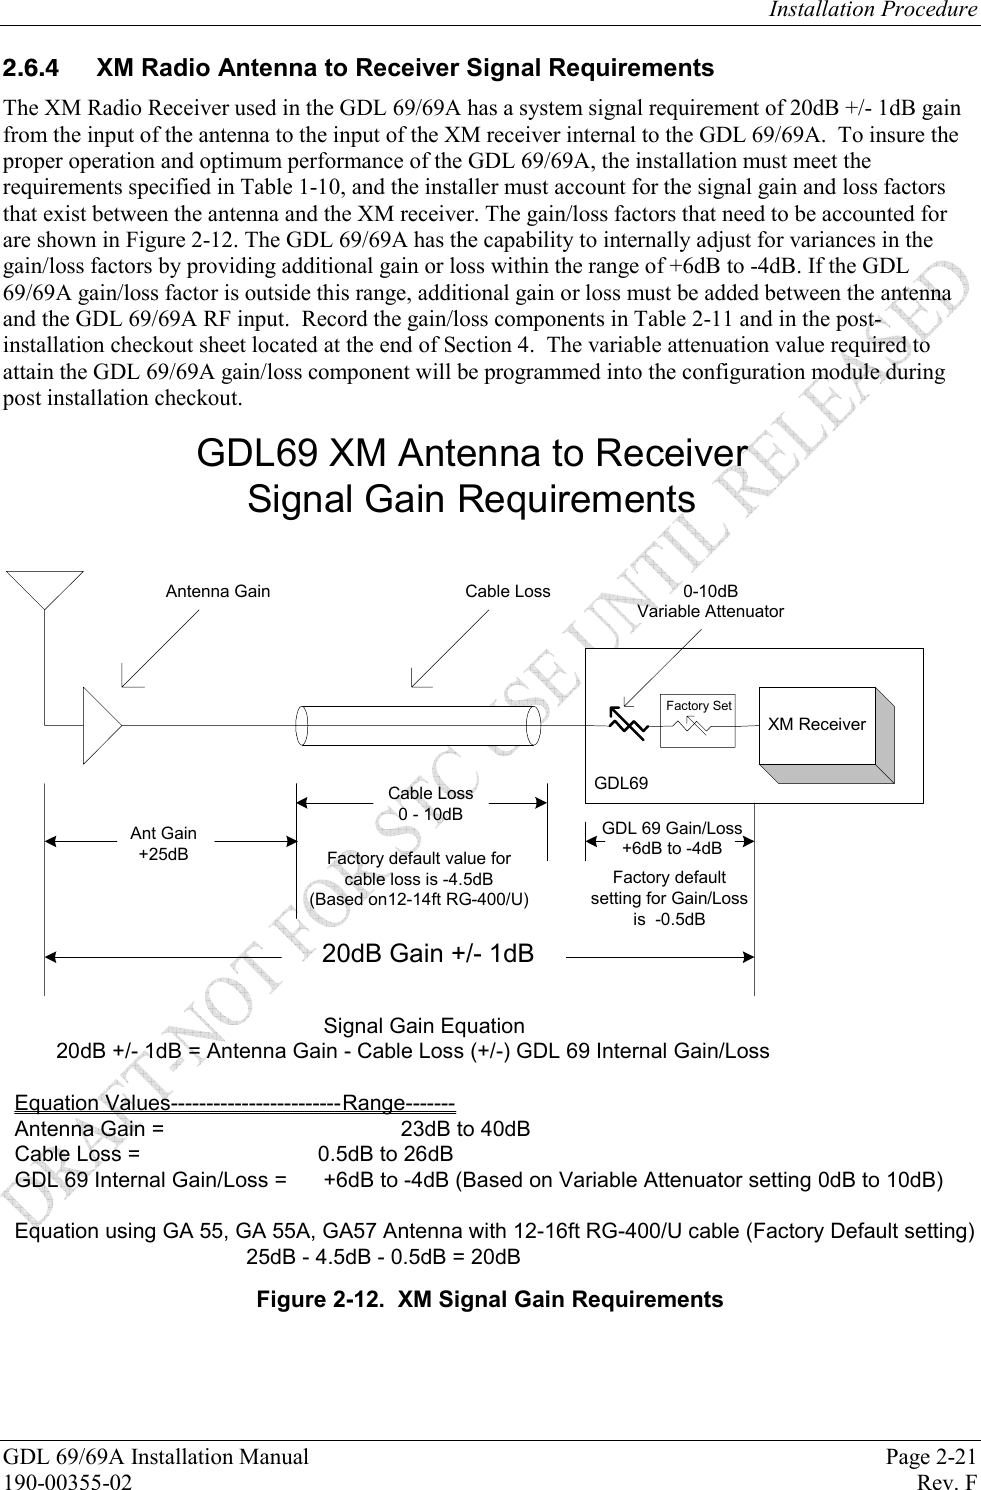 Installation Procedure GDL 69/69A Installation Manual  Page 2-21 190-00355-02   Rev. F   XM Radio Antenna to Receiver Signal Requirements The XM Radio Receiver used in the GDL 69/69A has a system signal requirement of 20dB +/- 1dB gain from the input of the antenna to the input of the XM receiver internal to the GDL 69/69A.  To insure the proper operation and optimum performance of the GDL 69/69A, the installation must meet the requirements specified in Table 1-10, and the installer must account for the signal gain and loss factors that exist between the antenna and the XM receiver. The gain/loss factors that need to be accounted for are shown in Figure 2-12. The GDL 69/69A has the capability to internally adjust for variances in the gain/loss factors by providing additional gain or loss within the range of +6dB to -4dB. If the GDL 69/69A gain/loss factor is outside this range, additional gain or loss must be added between the antenna and the GDL 69/69A RF input.  Record the gain/loss components in Table 2-11 and in the post-installation checkout sheet located at the end of Section 4.  The variable attenuation value required to attain the GDL 69/69A gain/loss component will be programmed into the configuration module during post installation checkout.   GDL69XM Receiver20dB Gain +/- 1dBFactory SetAntenna Gain Cable Loss 0-10dBVariable AttenuatorGDL69 XM Antenna to Receiver Signal Gain RequirementsGDL 69 Gain/Loss+6dB to -4dBAnt Gain+25dBCable Loss0 - 10dBFactory default value for cable loss is -4.5dB (Based on12-14ft RG-400/U)Factory default setting for Gain/Loss is  -0.5dBSignal Gain Equation       20dB +/- 1dB = Antenna Gain - Cable Loss (+/-) GDL 69 Internal Gain/LossEquation Values------------------------Range-------         Antenna Gain =  23dB to 40dBCable Loss =              0.5dB to 26dBGDL 69 Internal Gain/Loss =  +6dB to -4dB (Based on Variable Attenuator setting 0dB to 10dB)Equation using GA 55, GA 55A, GA57 Antenna with 12-16ft RG-400/U cable (Factory Default setting)25dB - 4.5dB - 0.5dB = 20dB  Figure 2-12.  XM Signal Gain Requirements 